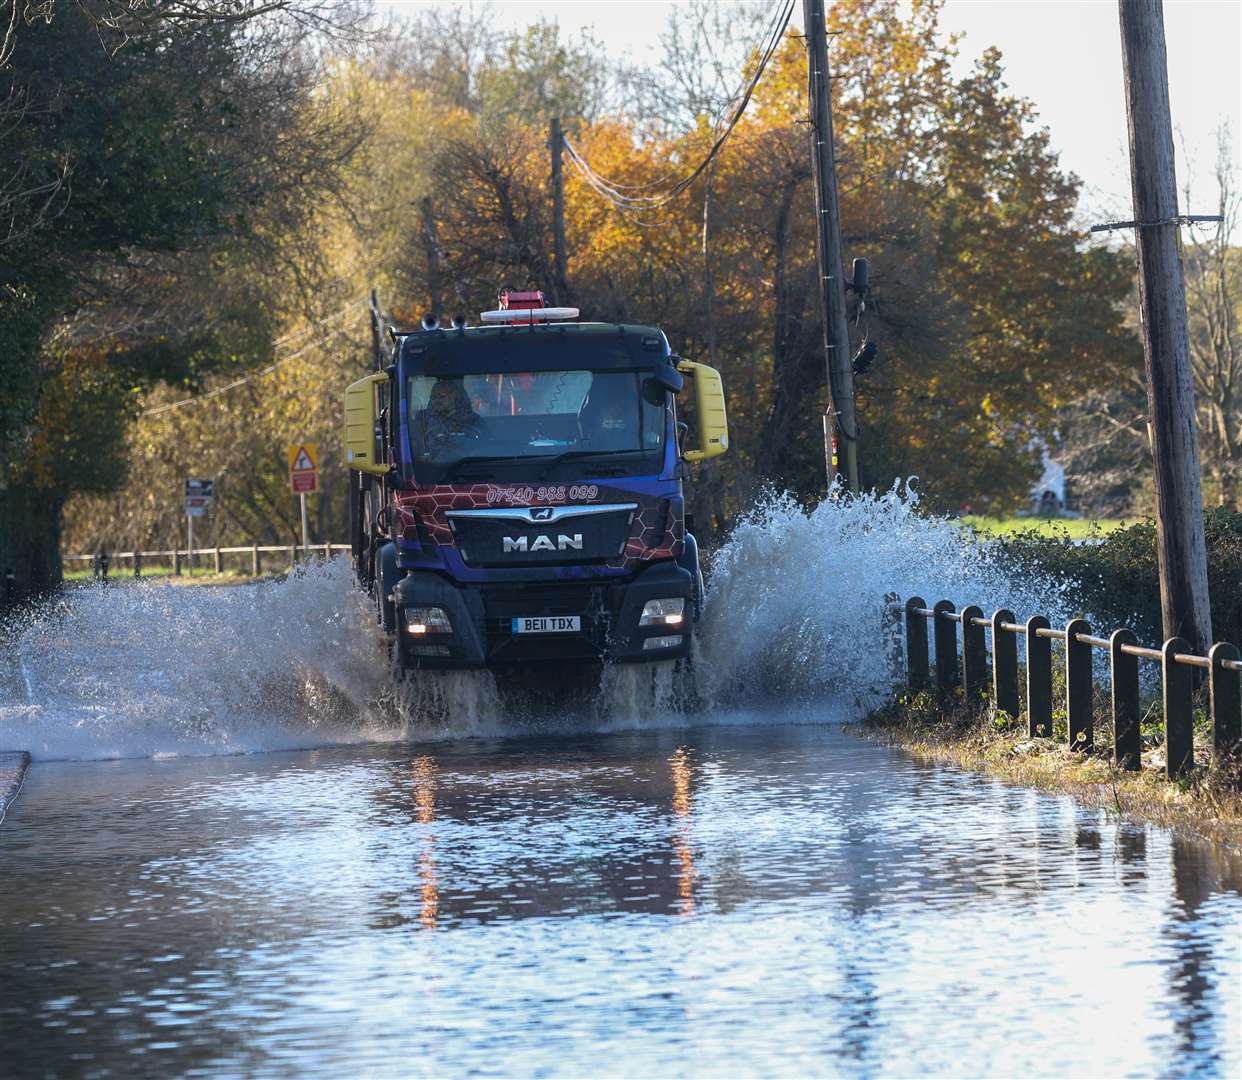 Flood warnings in Kent are being generated automatically during the industrial action. This was just last month.